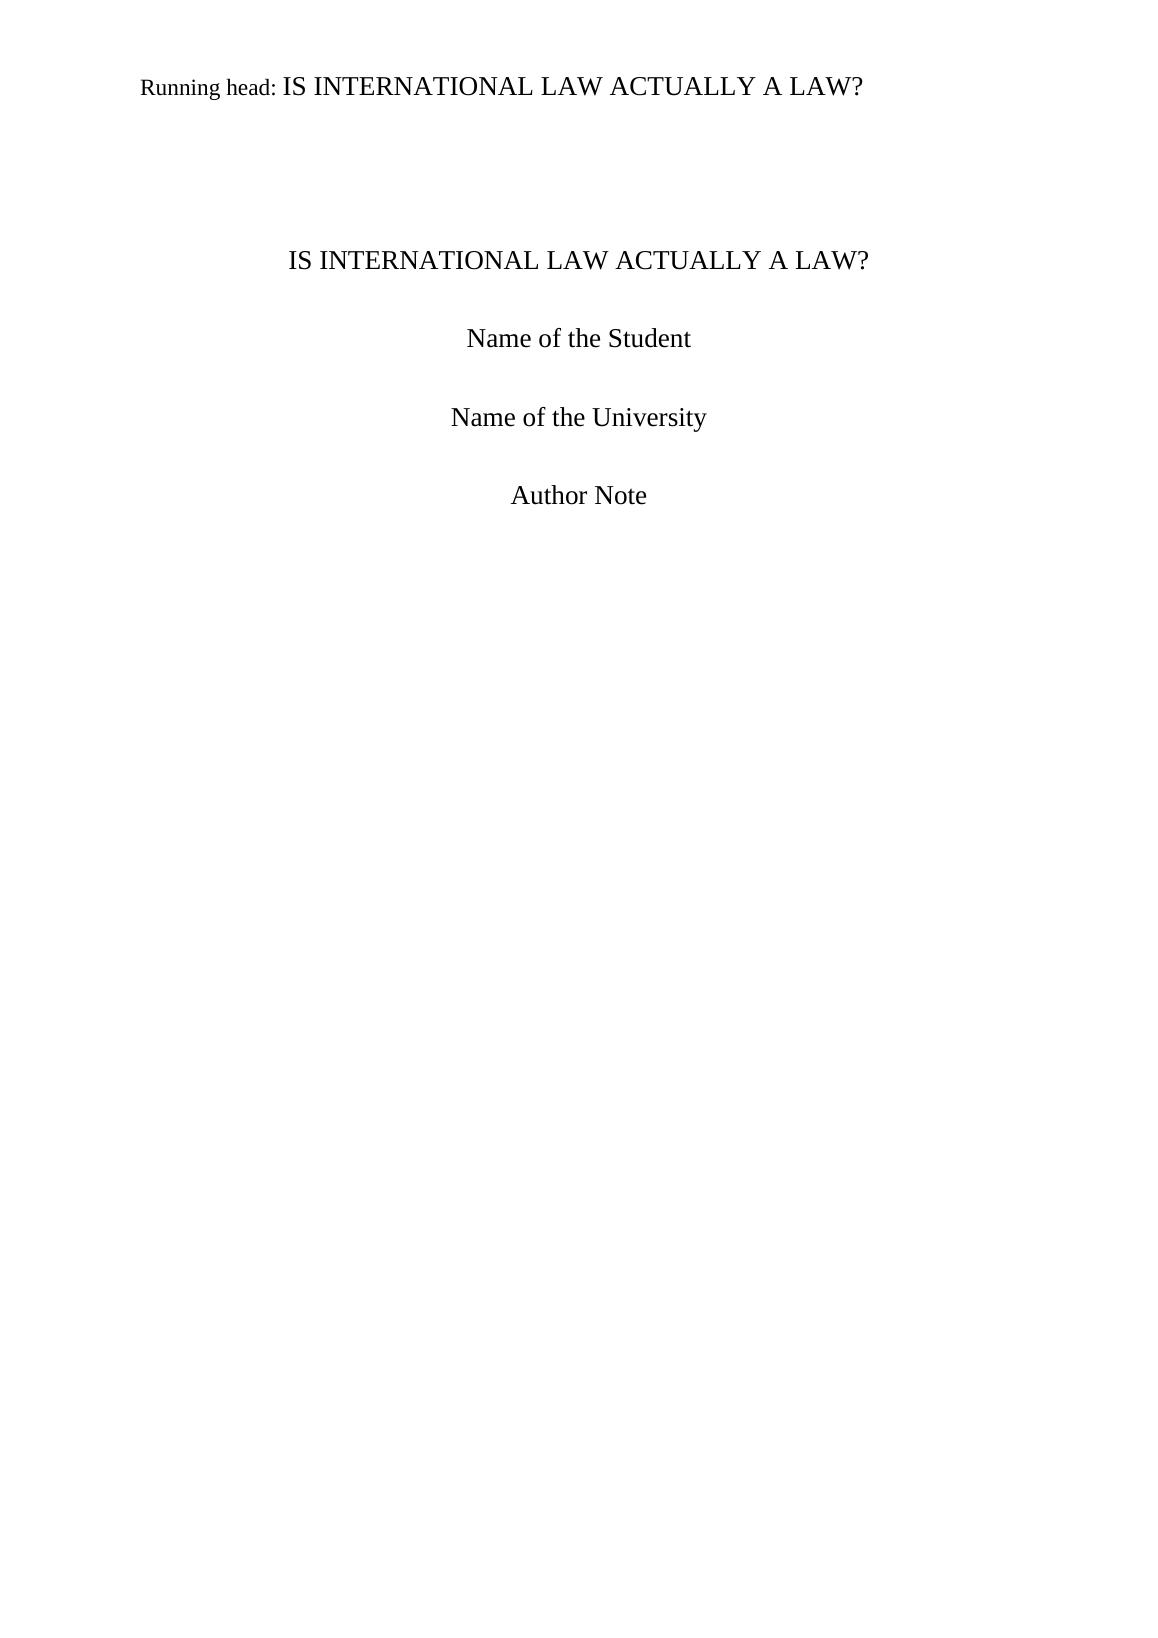 Is International Law Actually a Law? Case Study 2022_1